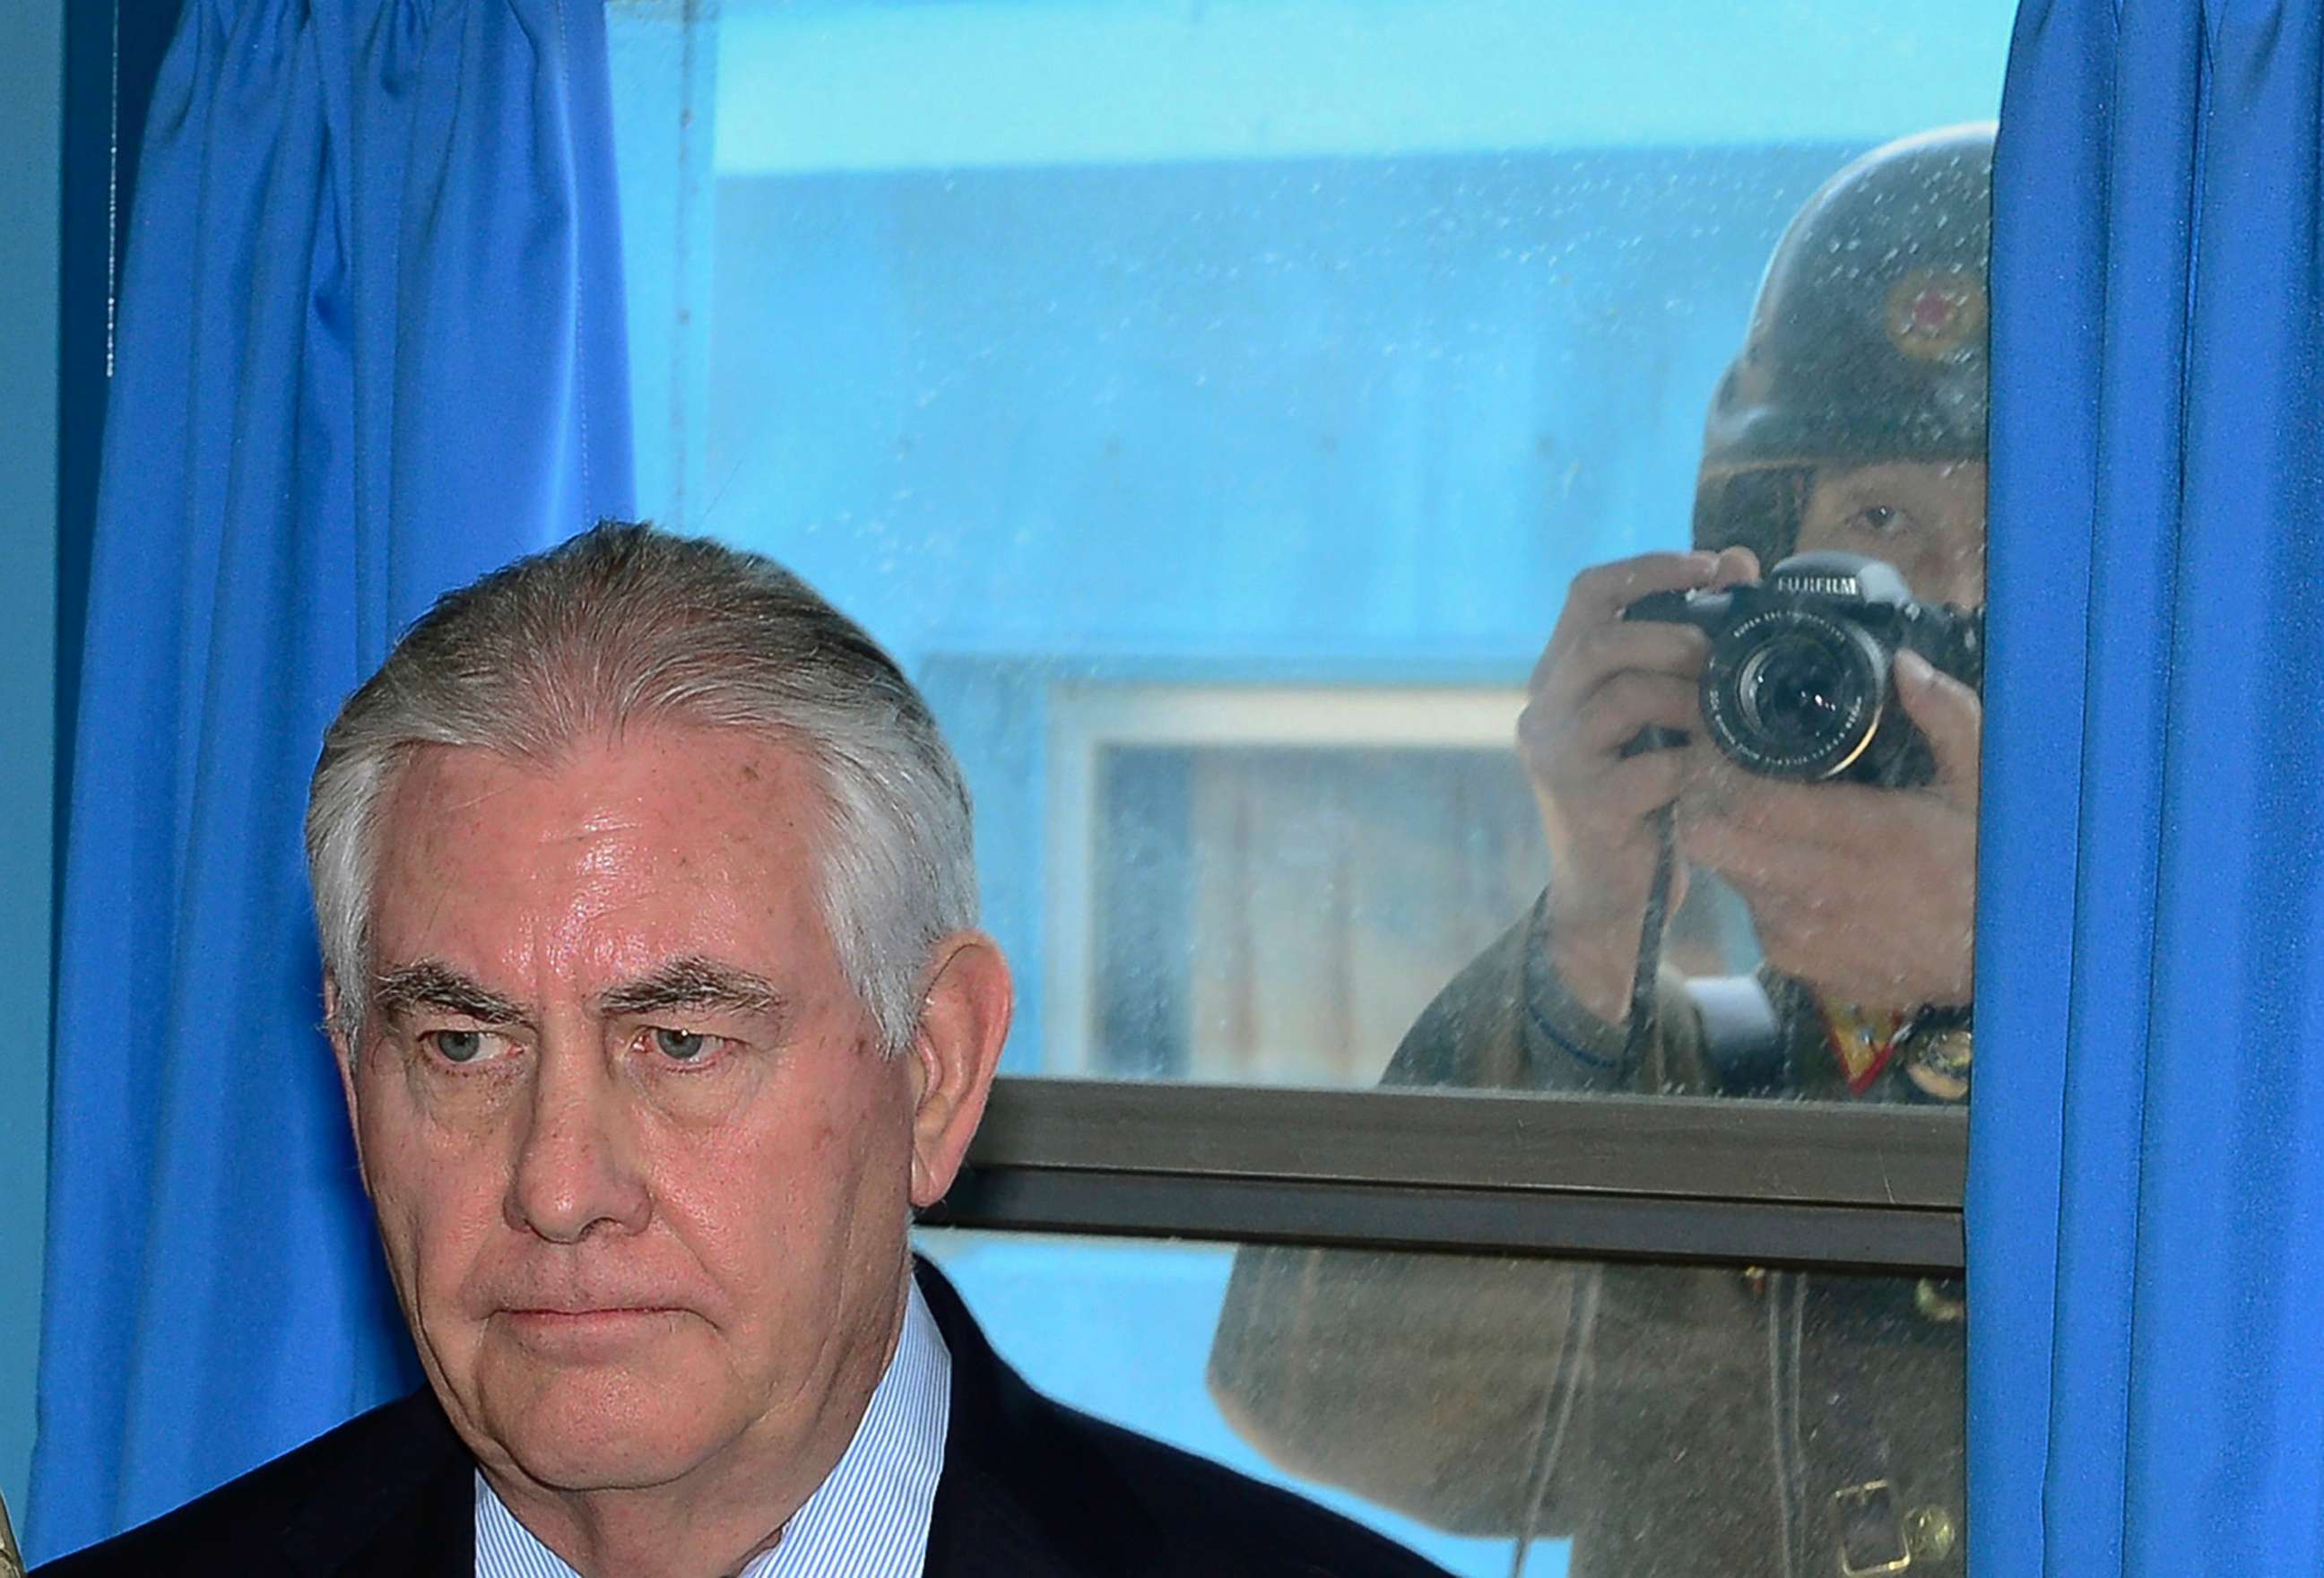 PHOTO: A North Korean soldier tries to take a photograph through a window while Secretary of State Rex Tillerson visits the U.N. Command Military Armistice Commission meeting room at the border village of Panmunjom, South Korea, March 17, 2017.